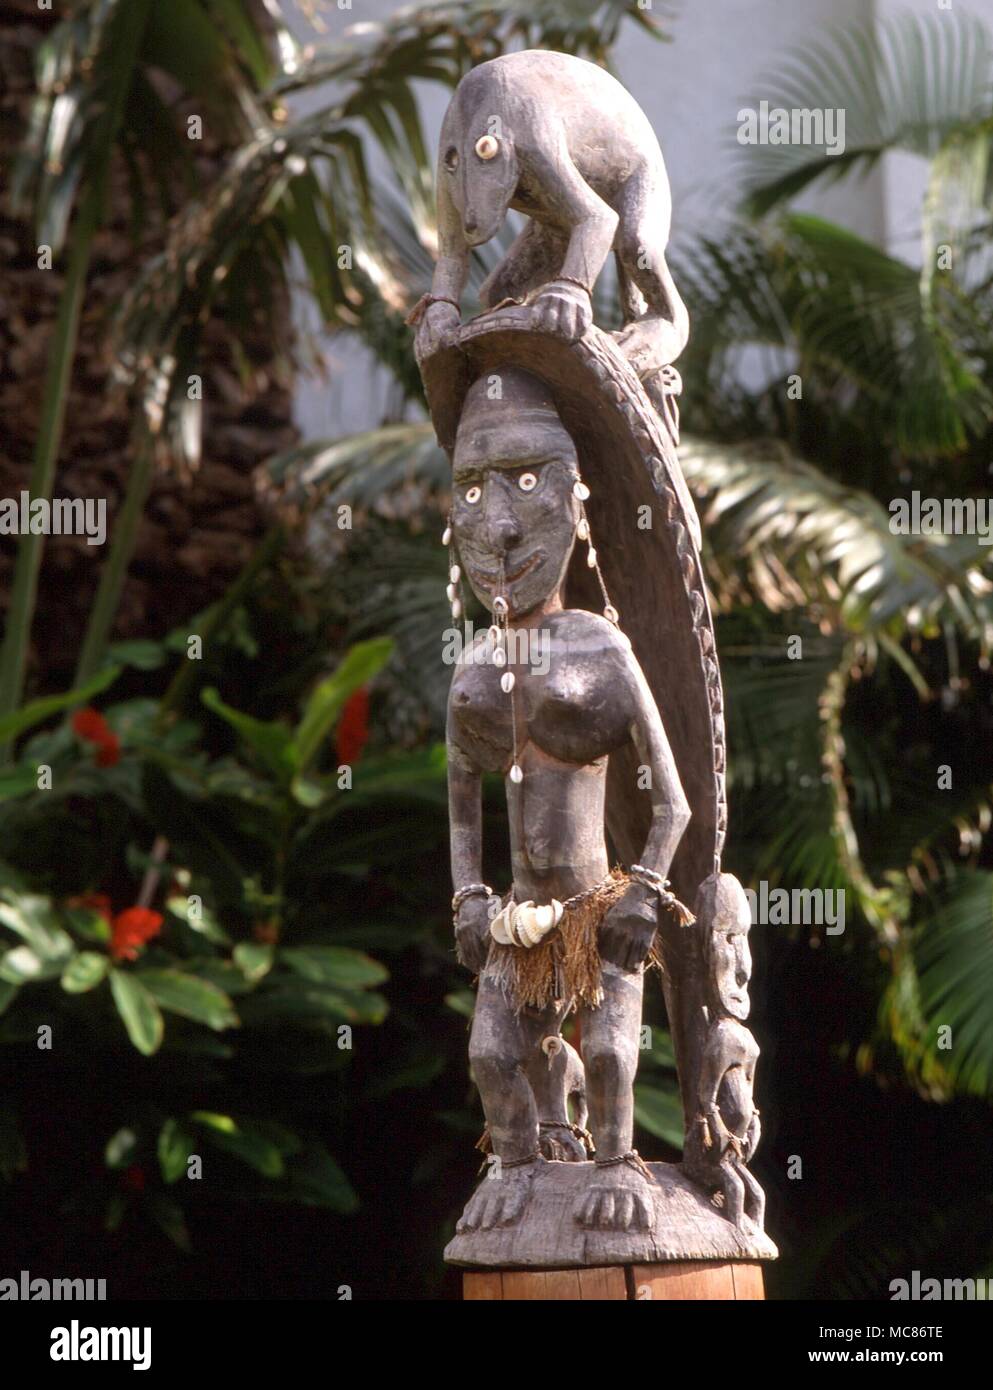 POLYNESIAN MYTHOLOGY Polynesian wooden magical statue with eyes from cowrie shells. Private collection, Hawaii Stock Photo